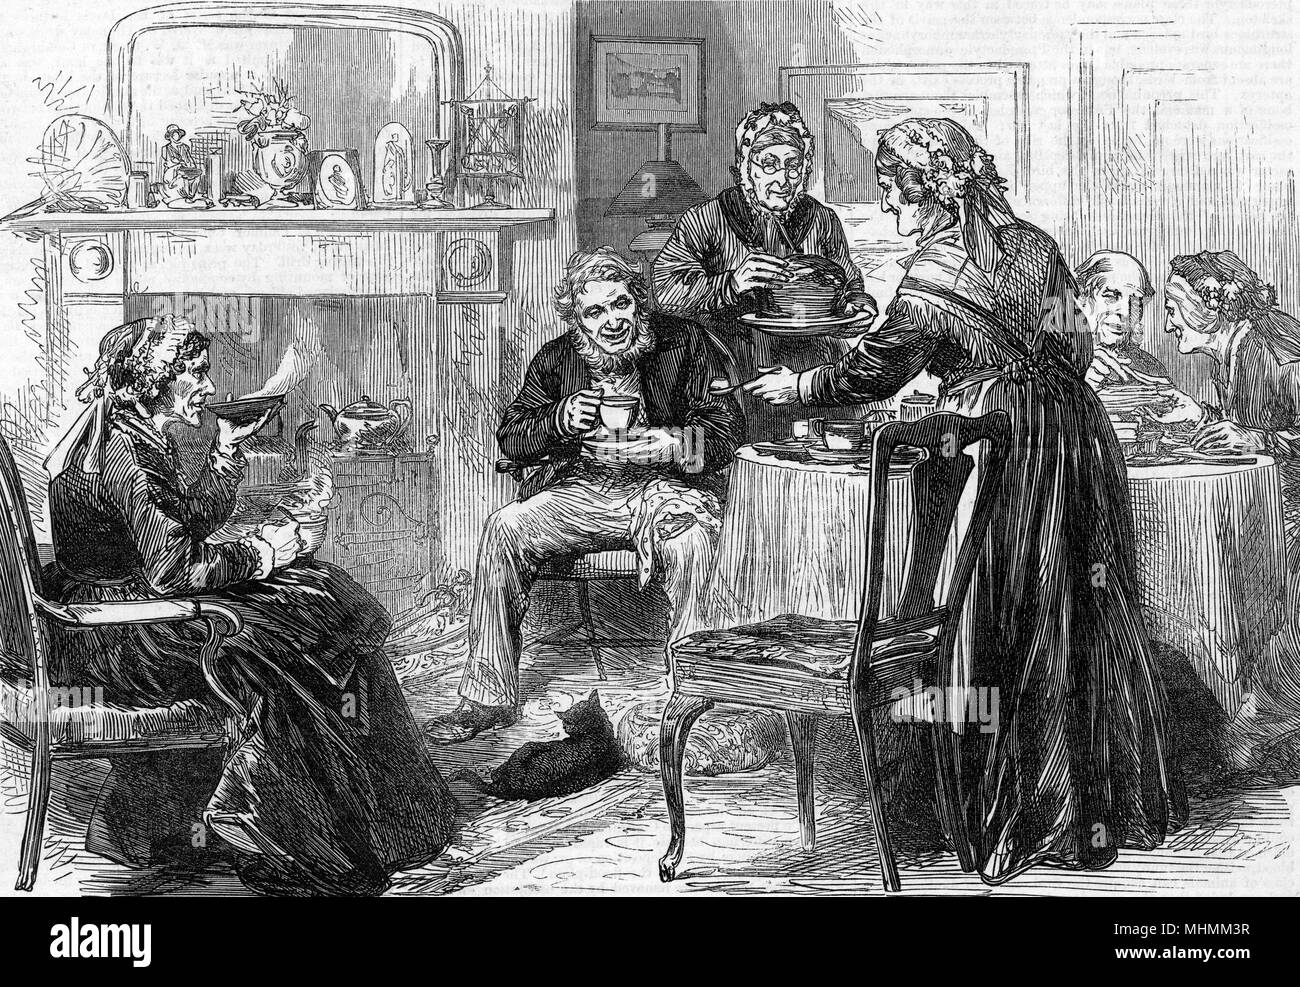 Inmates of the Royal Masonic Institution for the Aged and Widows enjoy a cup of tea - though one of them is drinking hers out of her saucer.     Date: 1875 Stock Photo